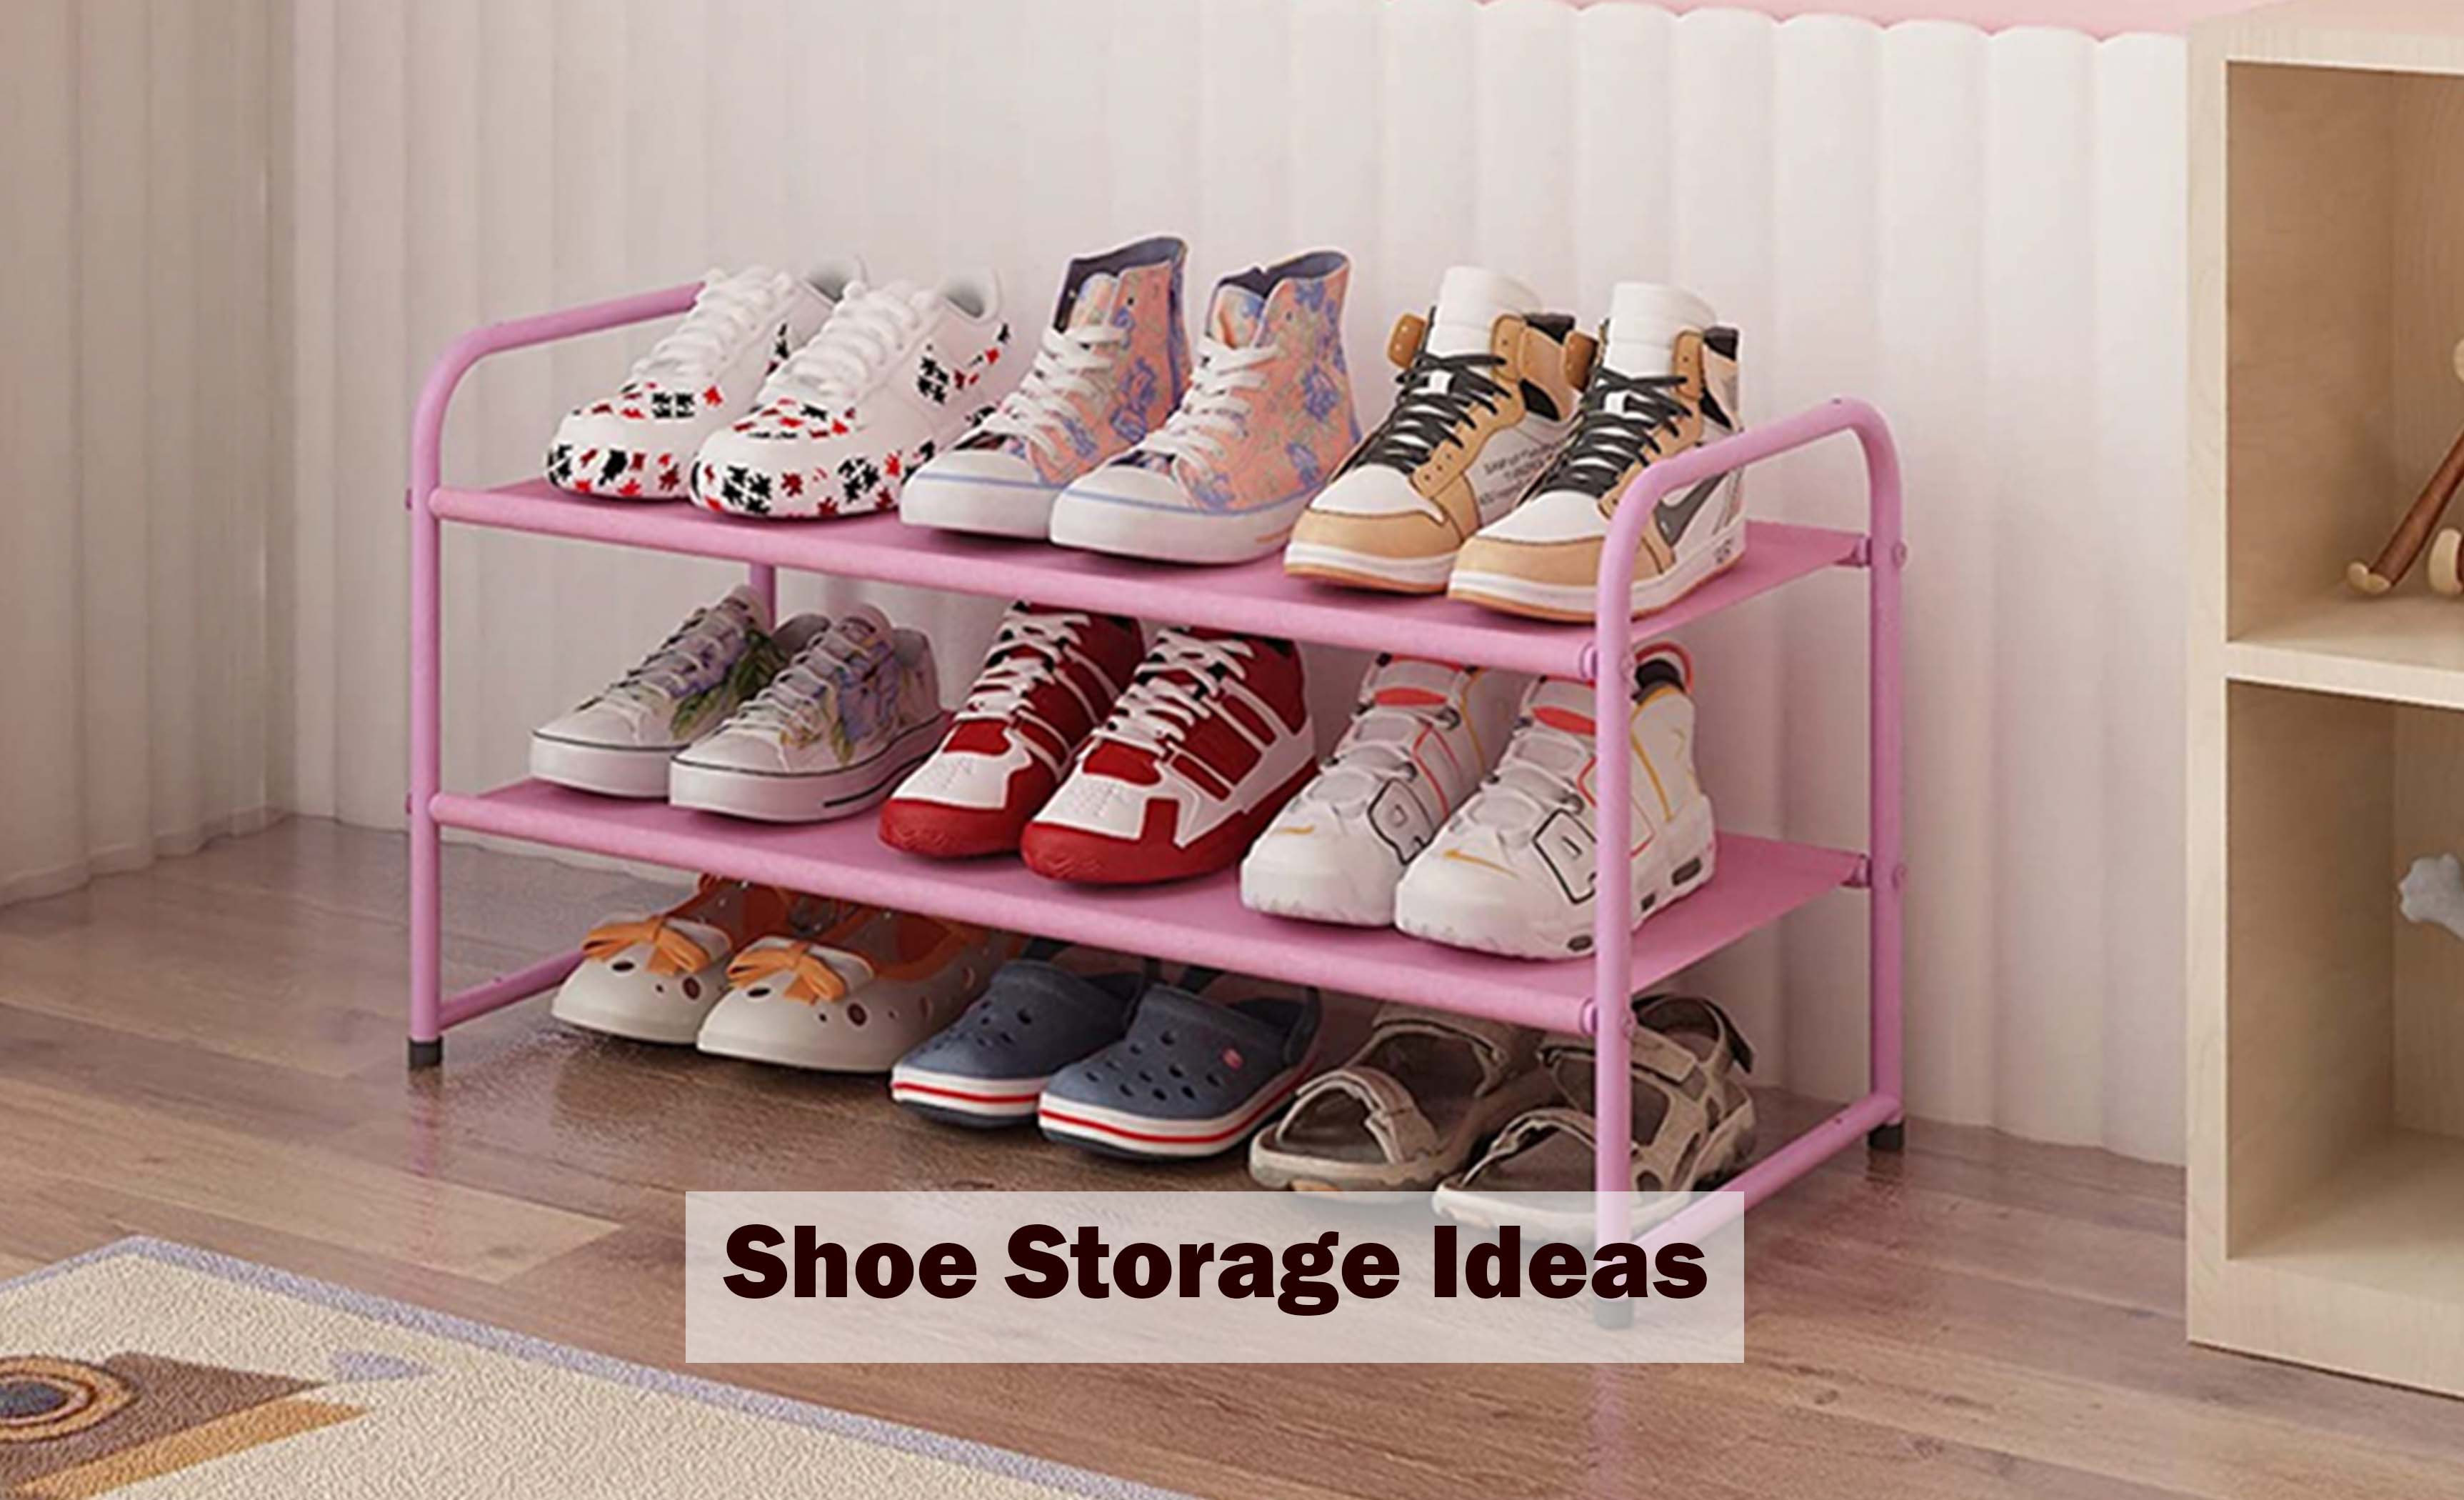 Shoe Storage Ideas - How To Organize My Shoes?